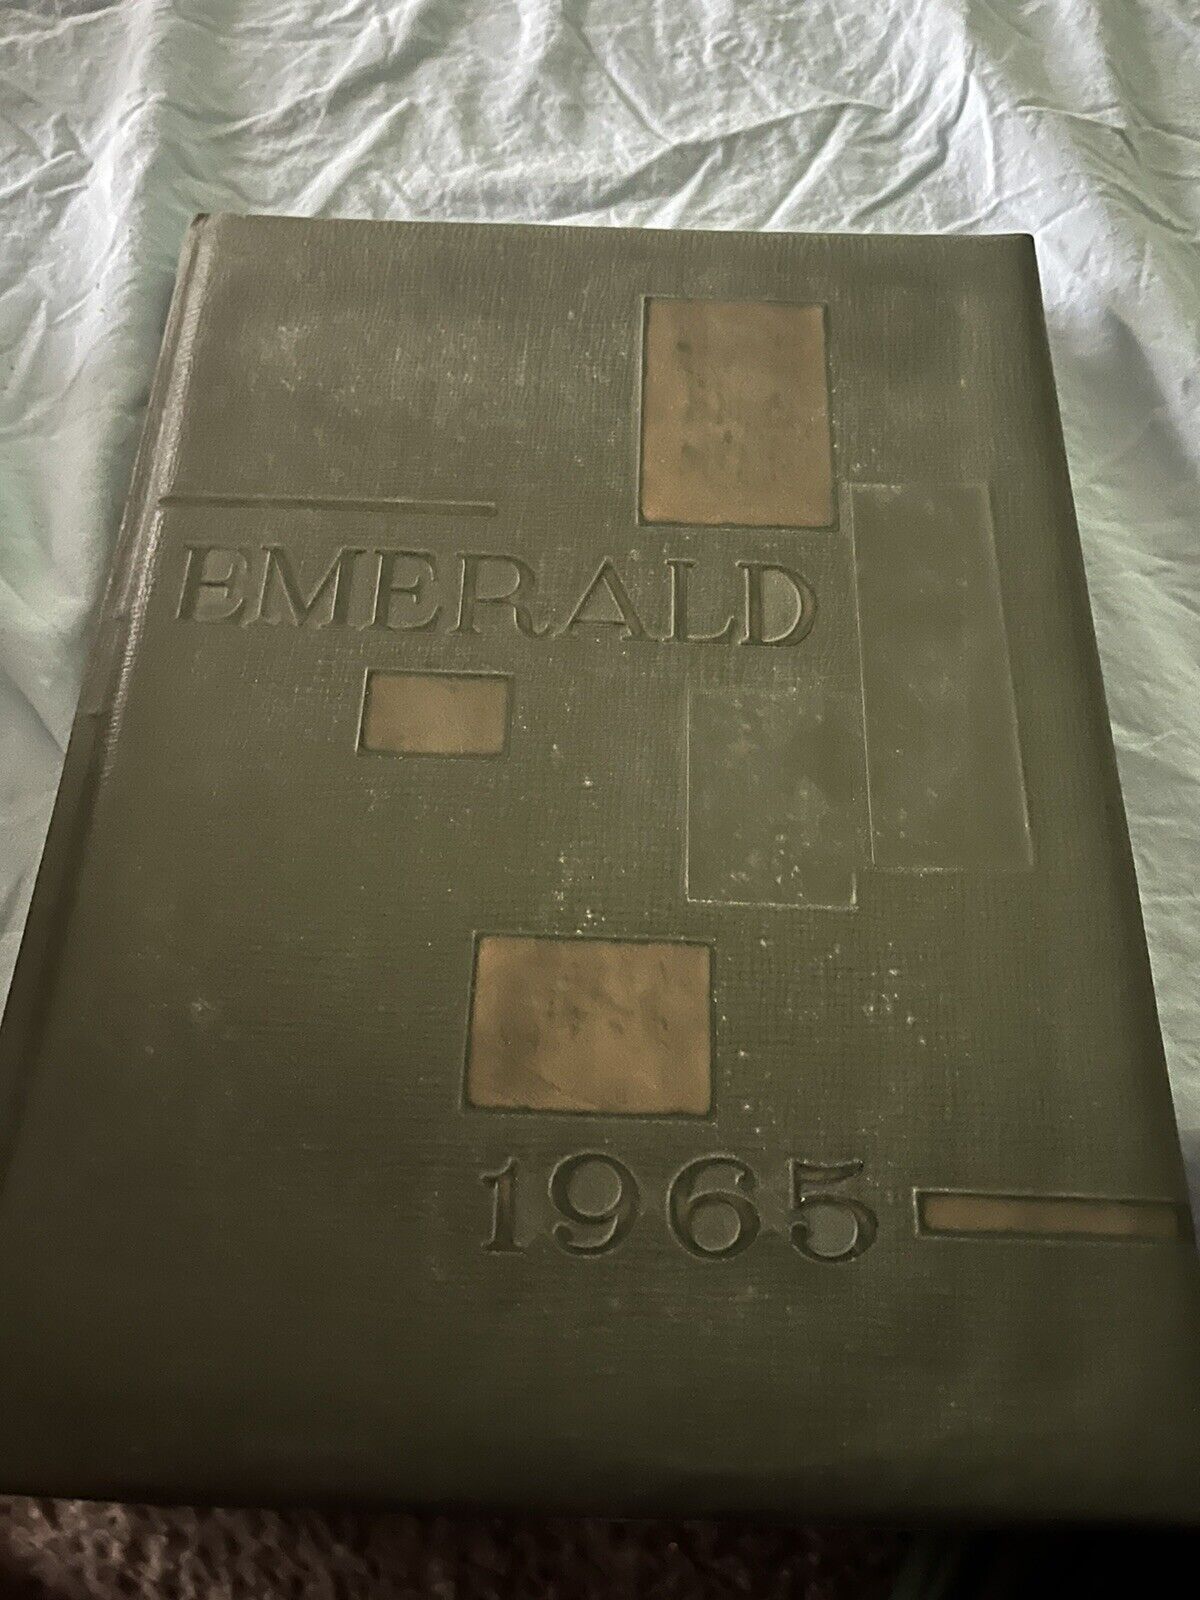 Donegal High School Yearbook 1965 Emerald Mount Joy, PA